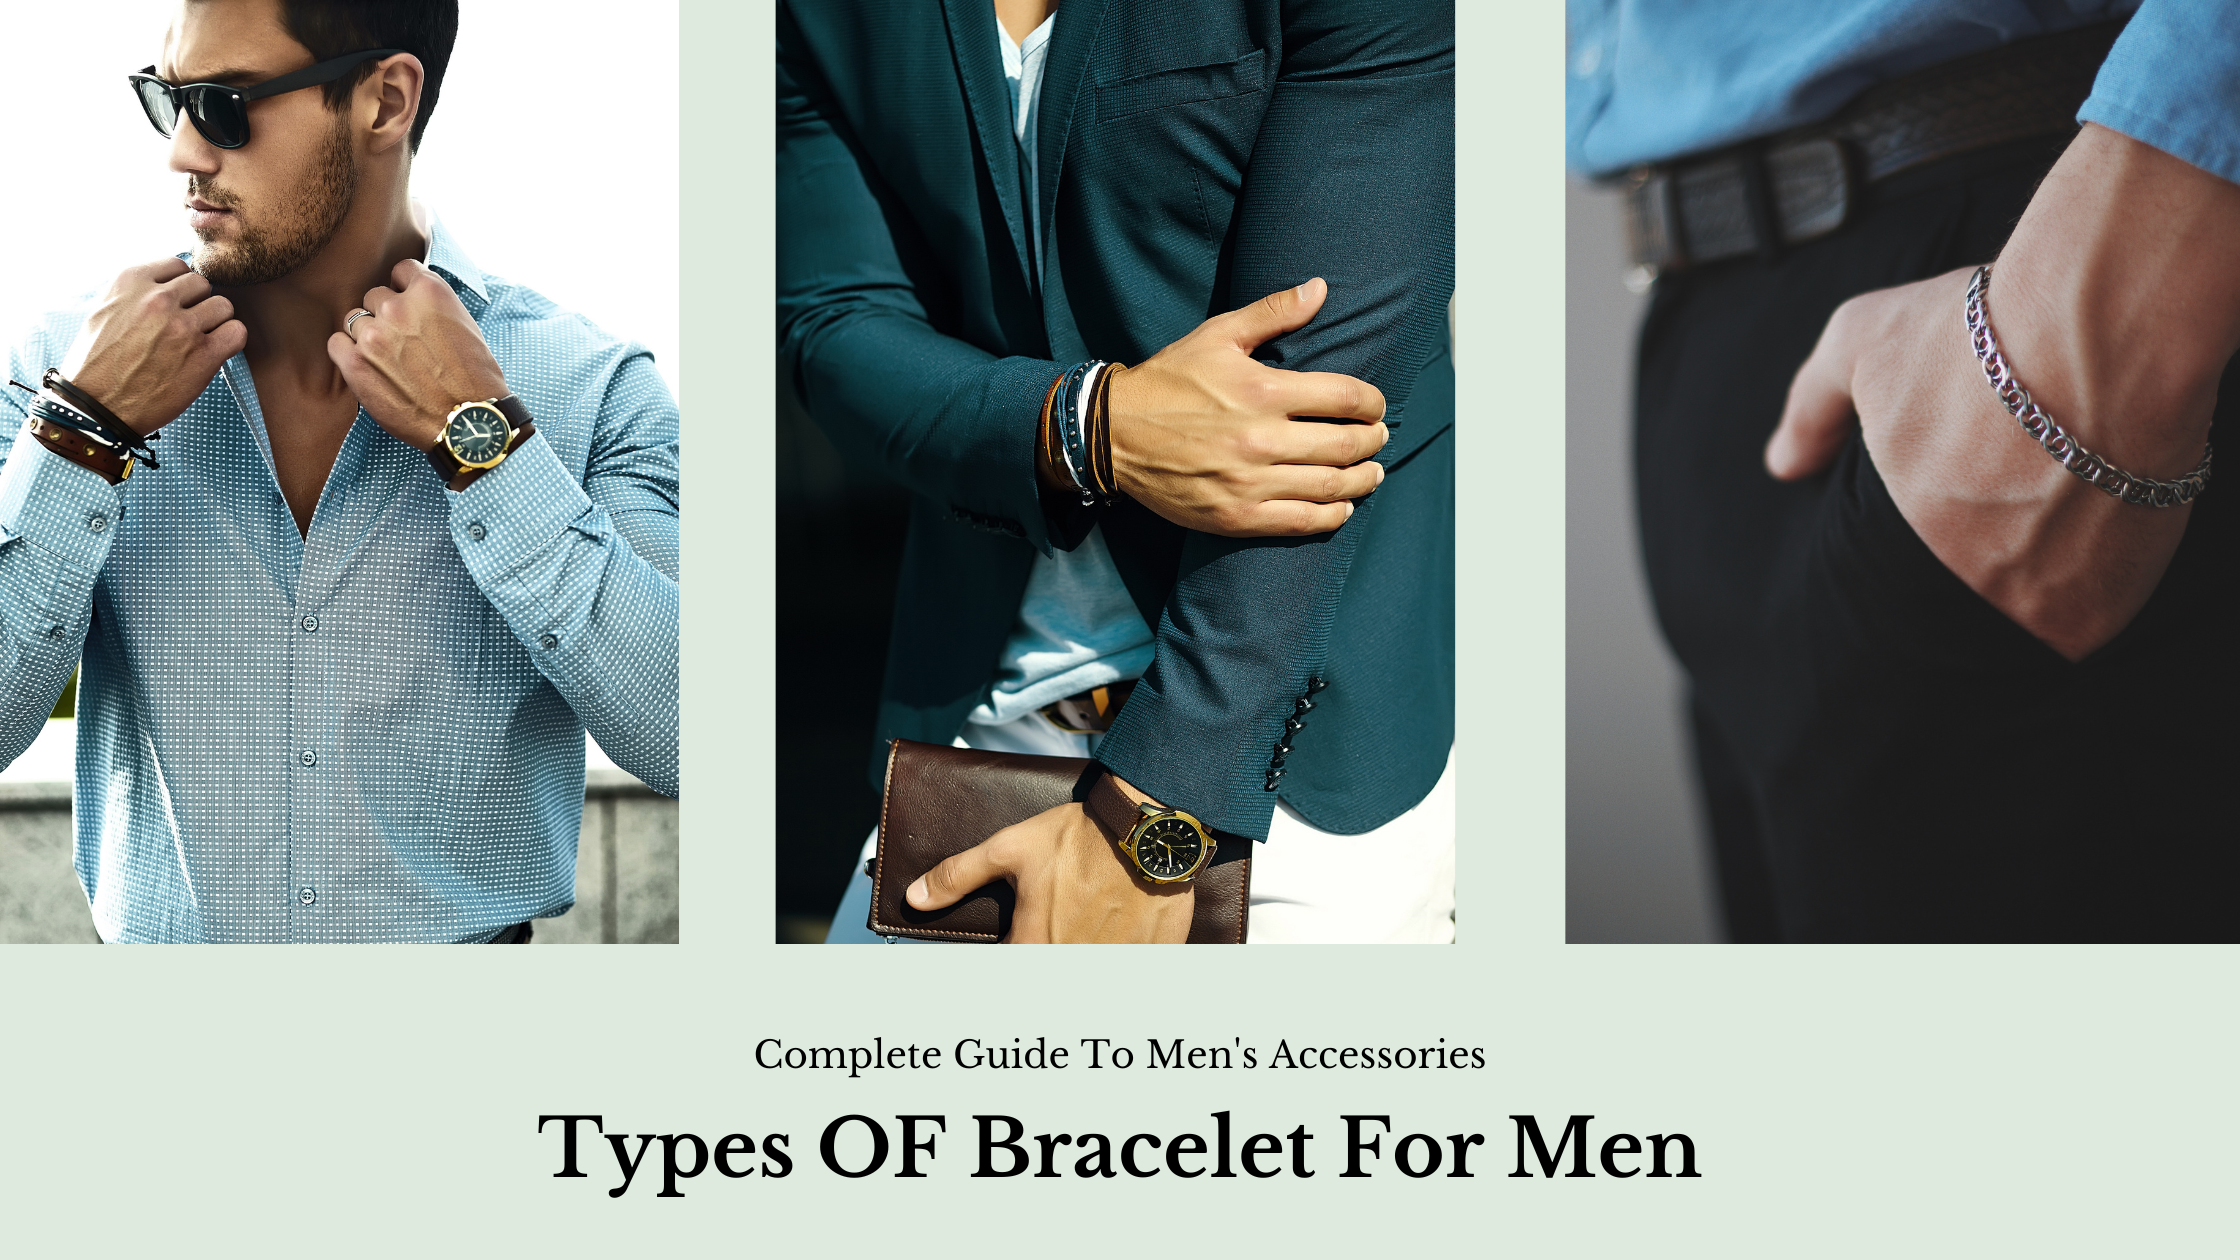 The Ultimate Guide to Choosing the Perfect Bracelet for Men - My Bracelet